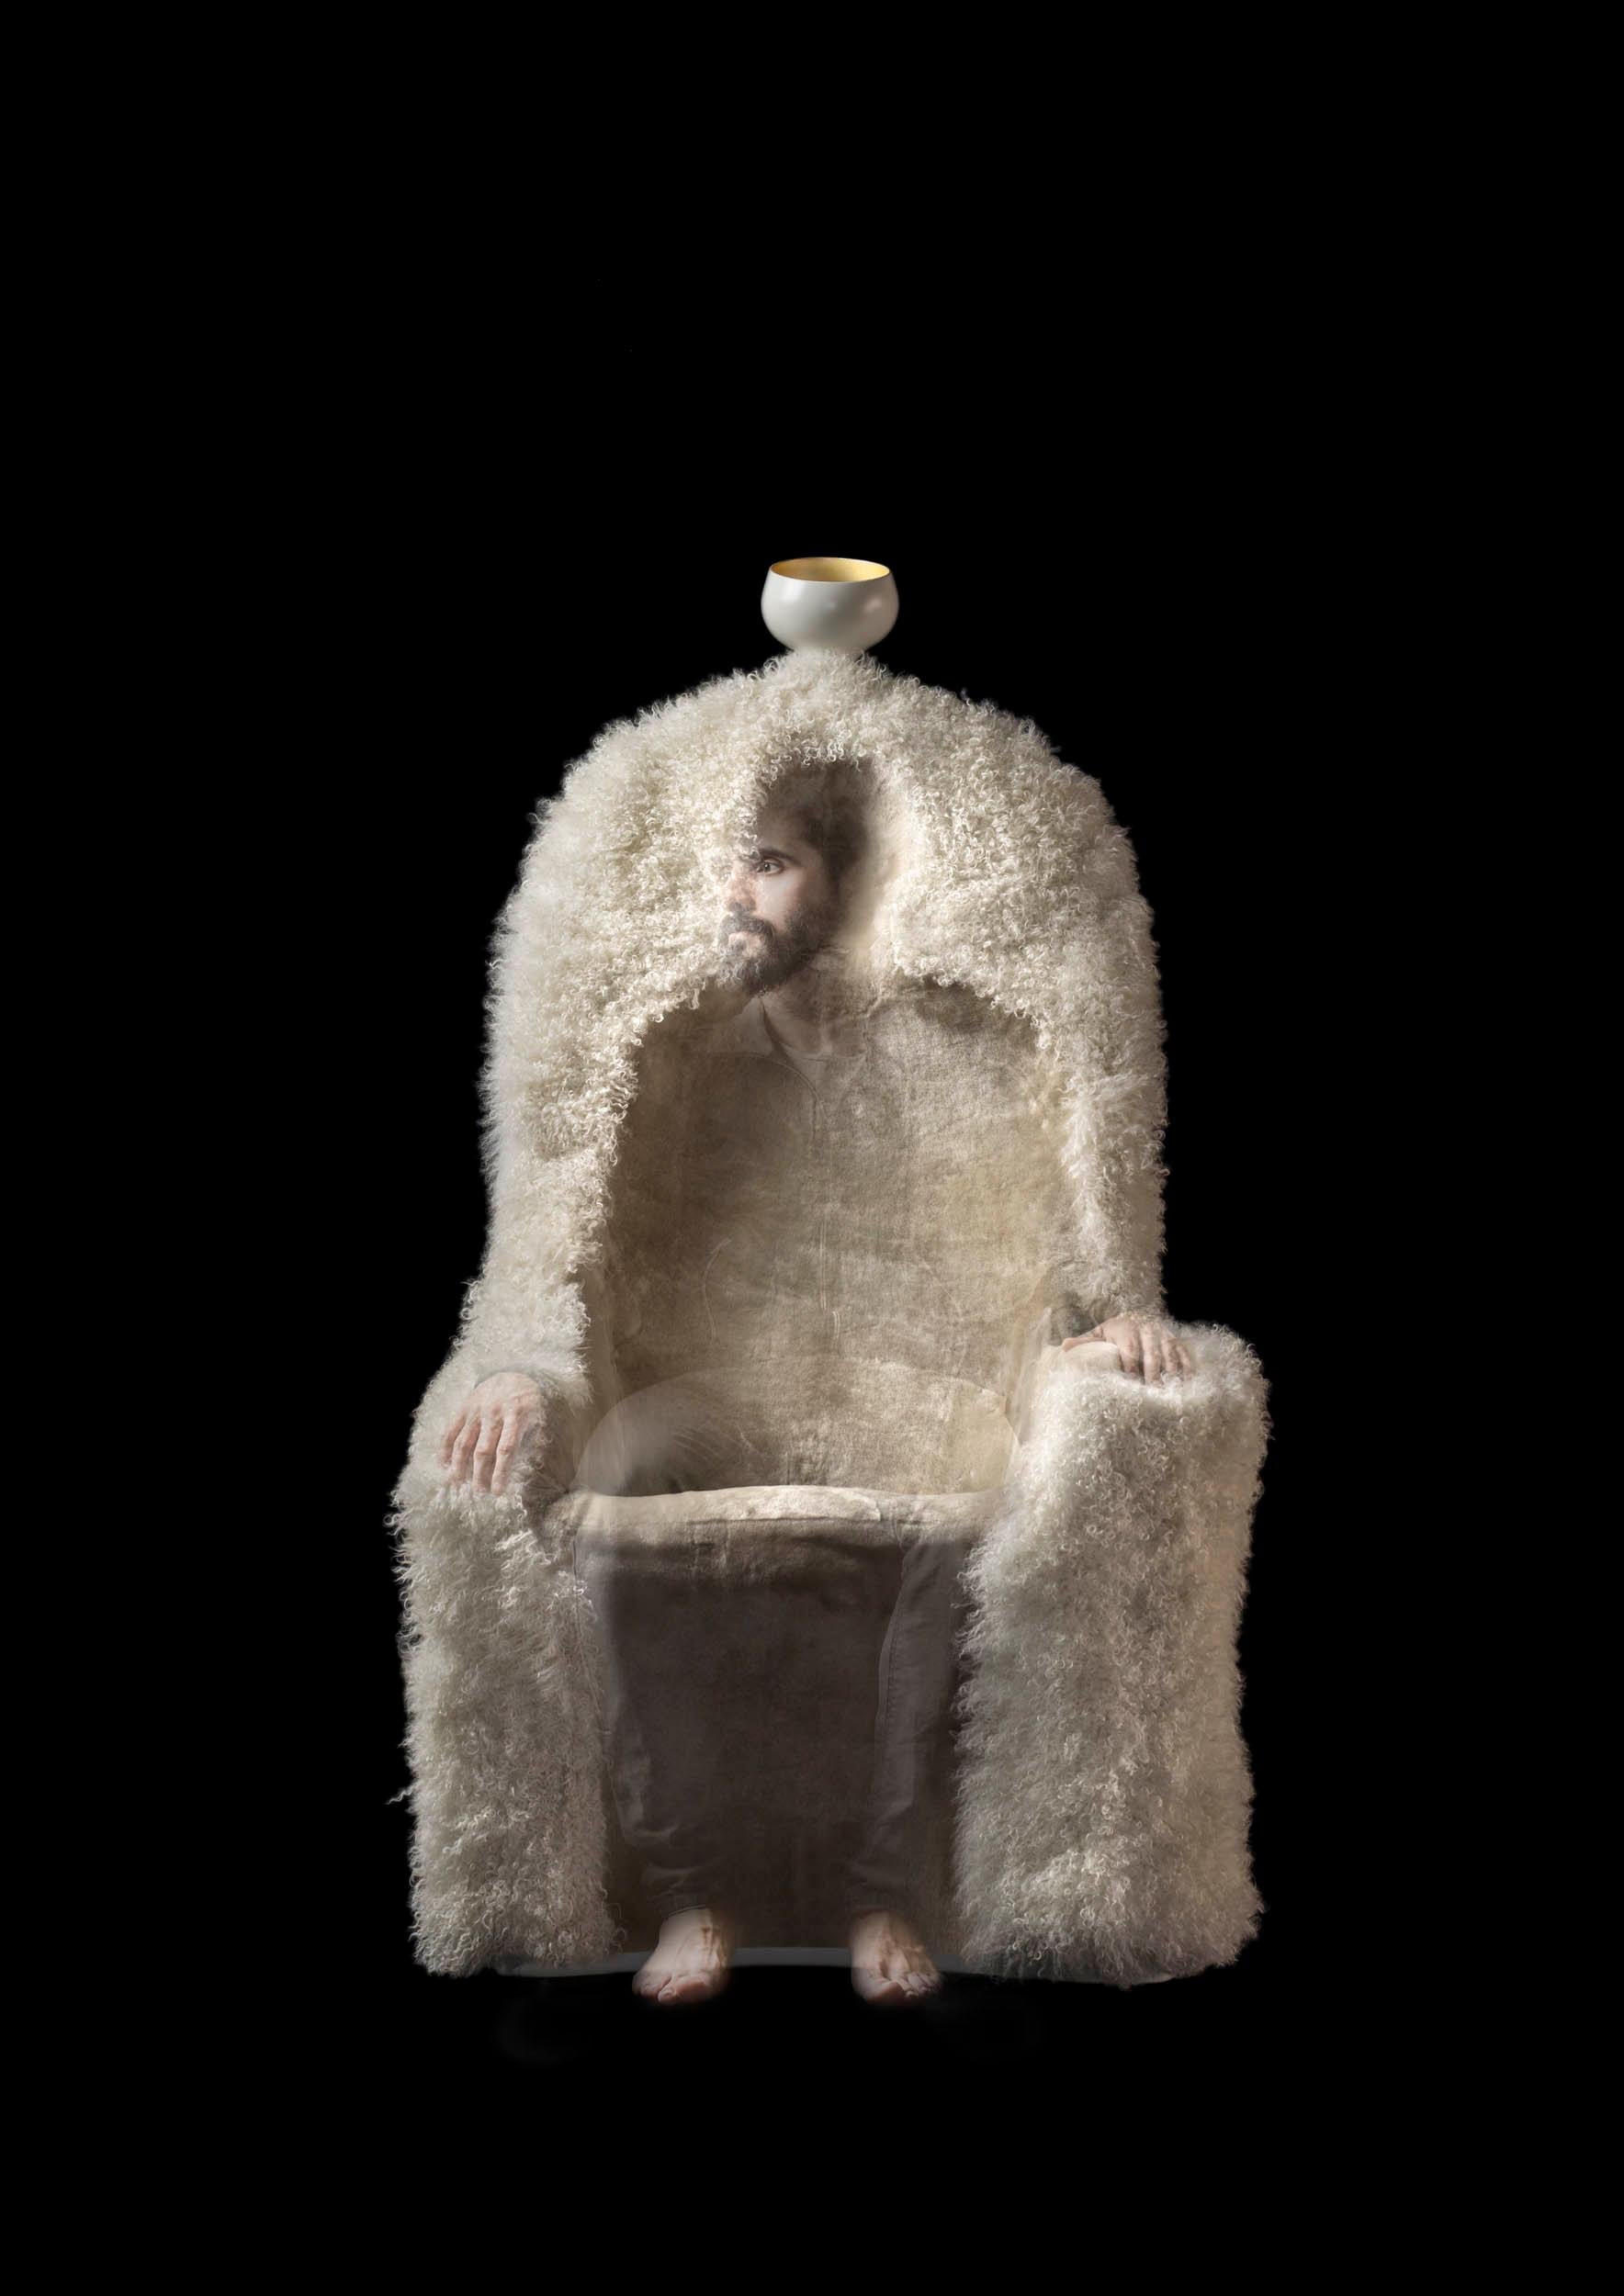 Invisible personage armchair and lamp, Salvador Dalí 
Limited edition of 20 unique pieces
Design inspired on an artwork by Salvador Dalí
Dimensions: 80 x 90 x 150 H cm
Materials: Composite structure upholstered in sheepskin.
 Polyamide